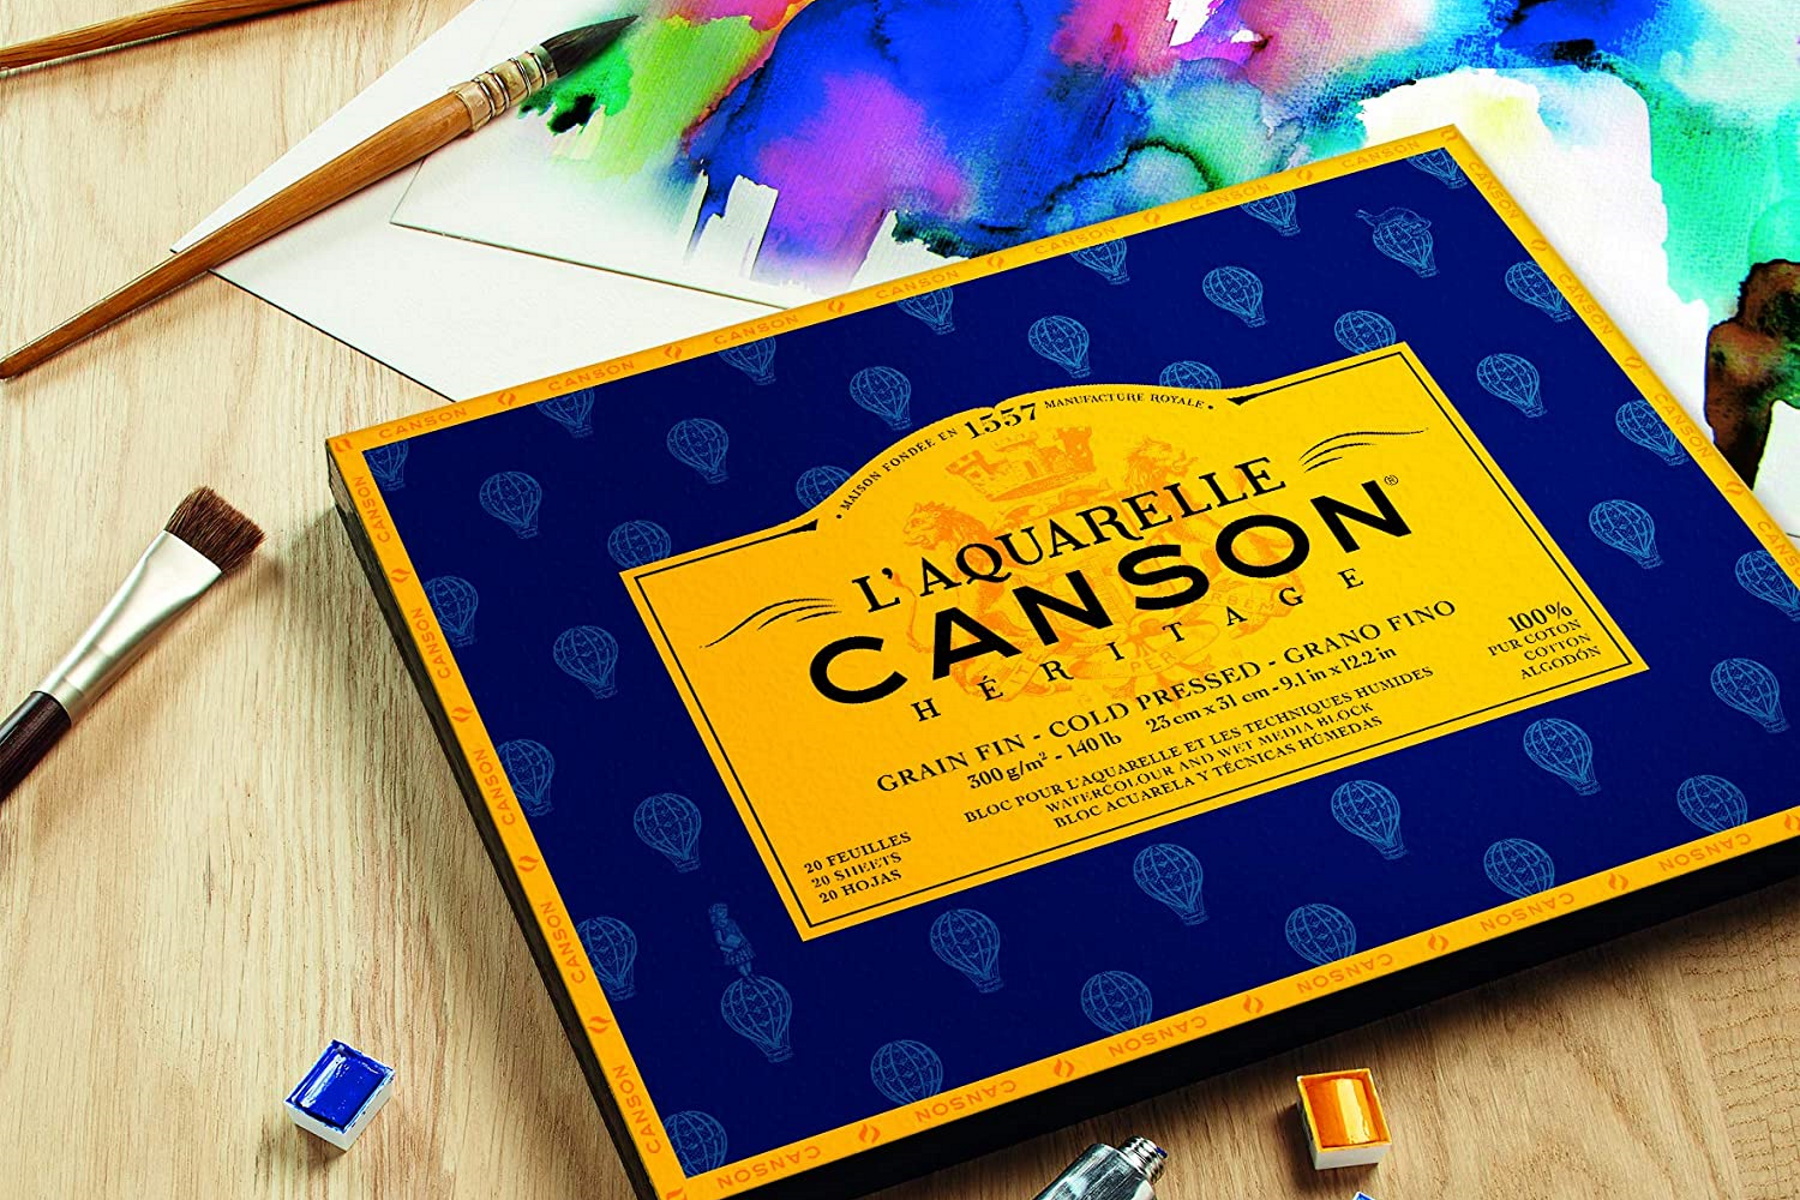 Canson Heritage best watercolor blocks featured